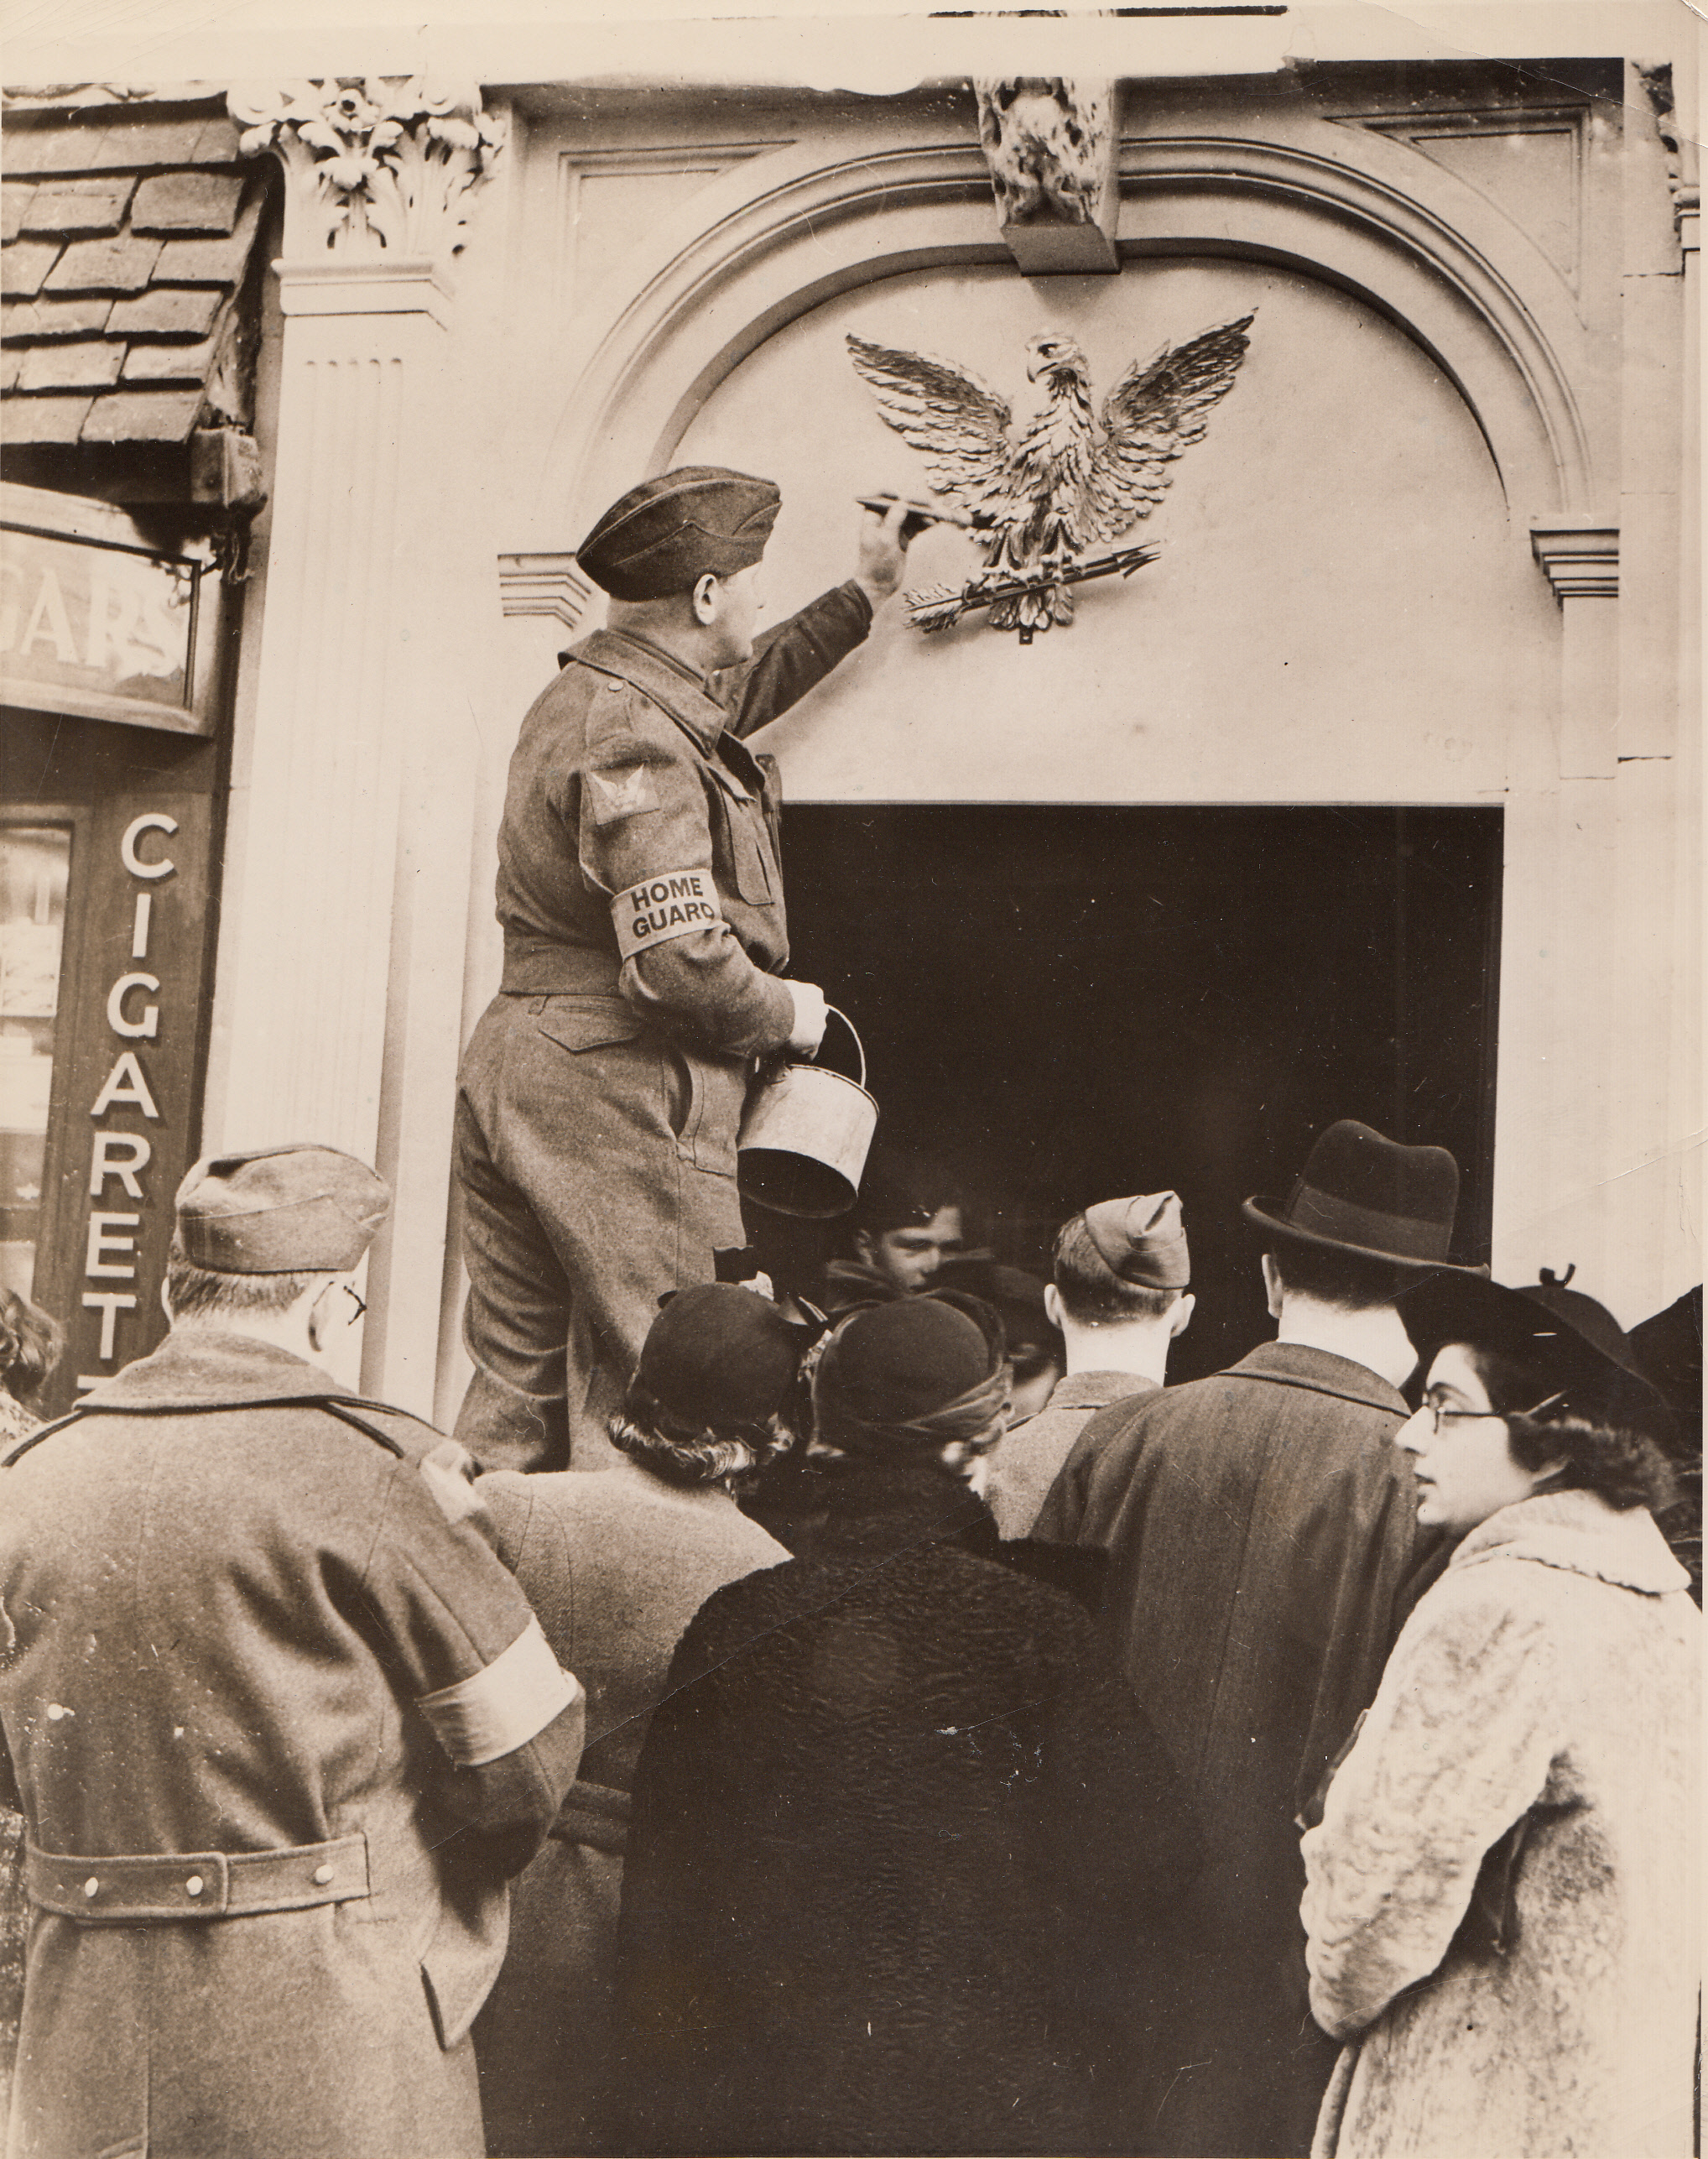 NEW CLUB FOR AMERICANS, 1/14/41  LONDON: - A member of the American mechanized corps serving with the British, gilds the eagle over the entrance to the American Eagle Club after the club was formerly opened, Dec. 17.  The club will be used as a center for all Americans serving with the British forces.;